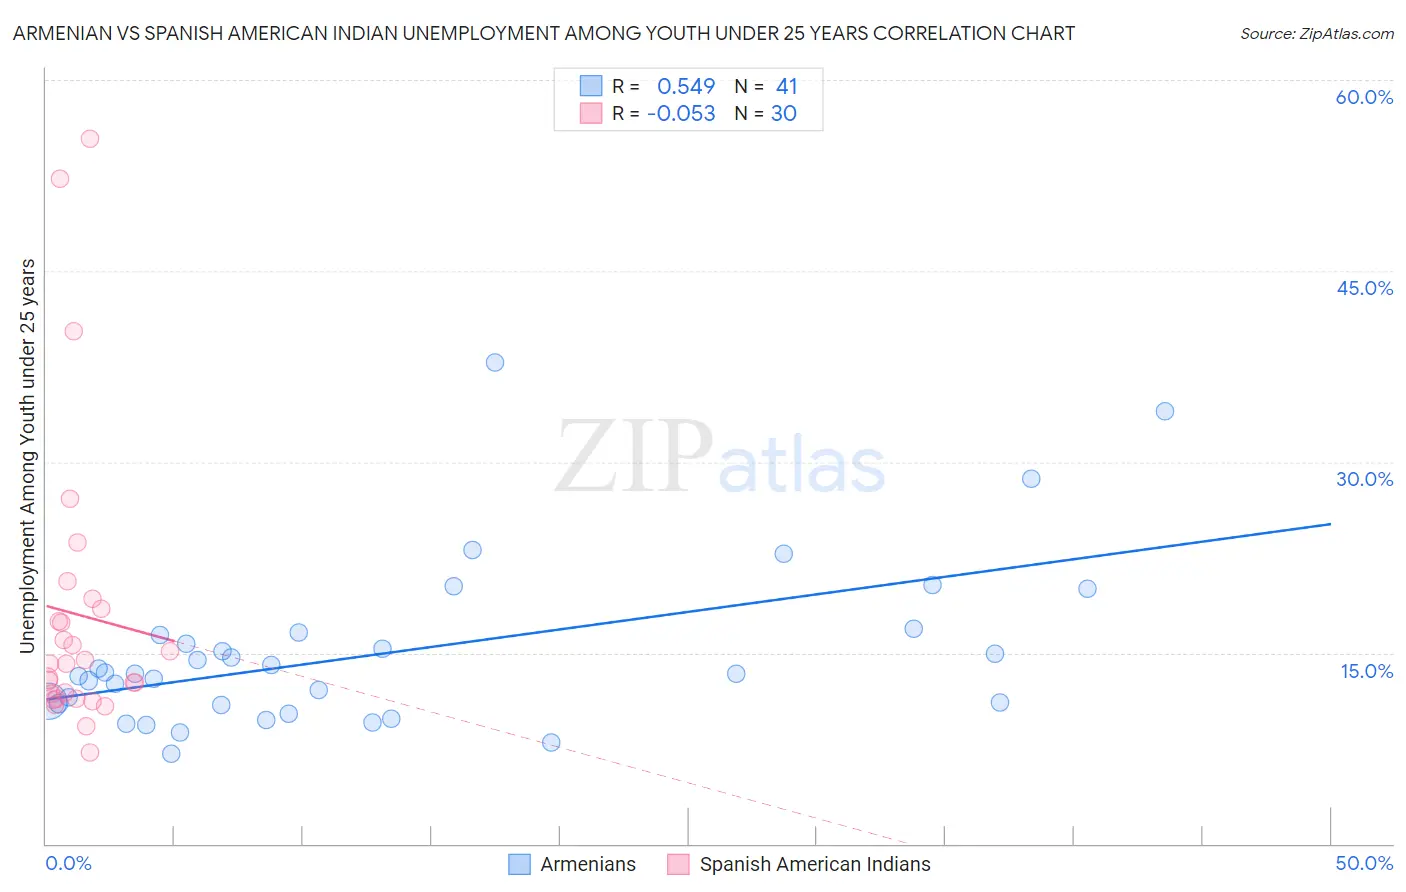 Armenian vs Spanish American Indian Unemployment Among Youth under 25 years